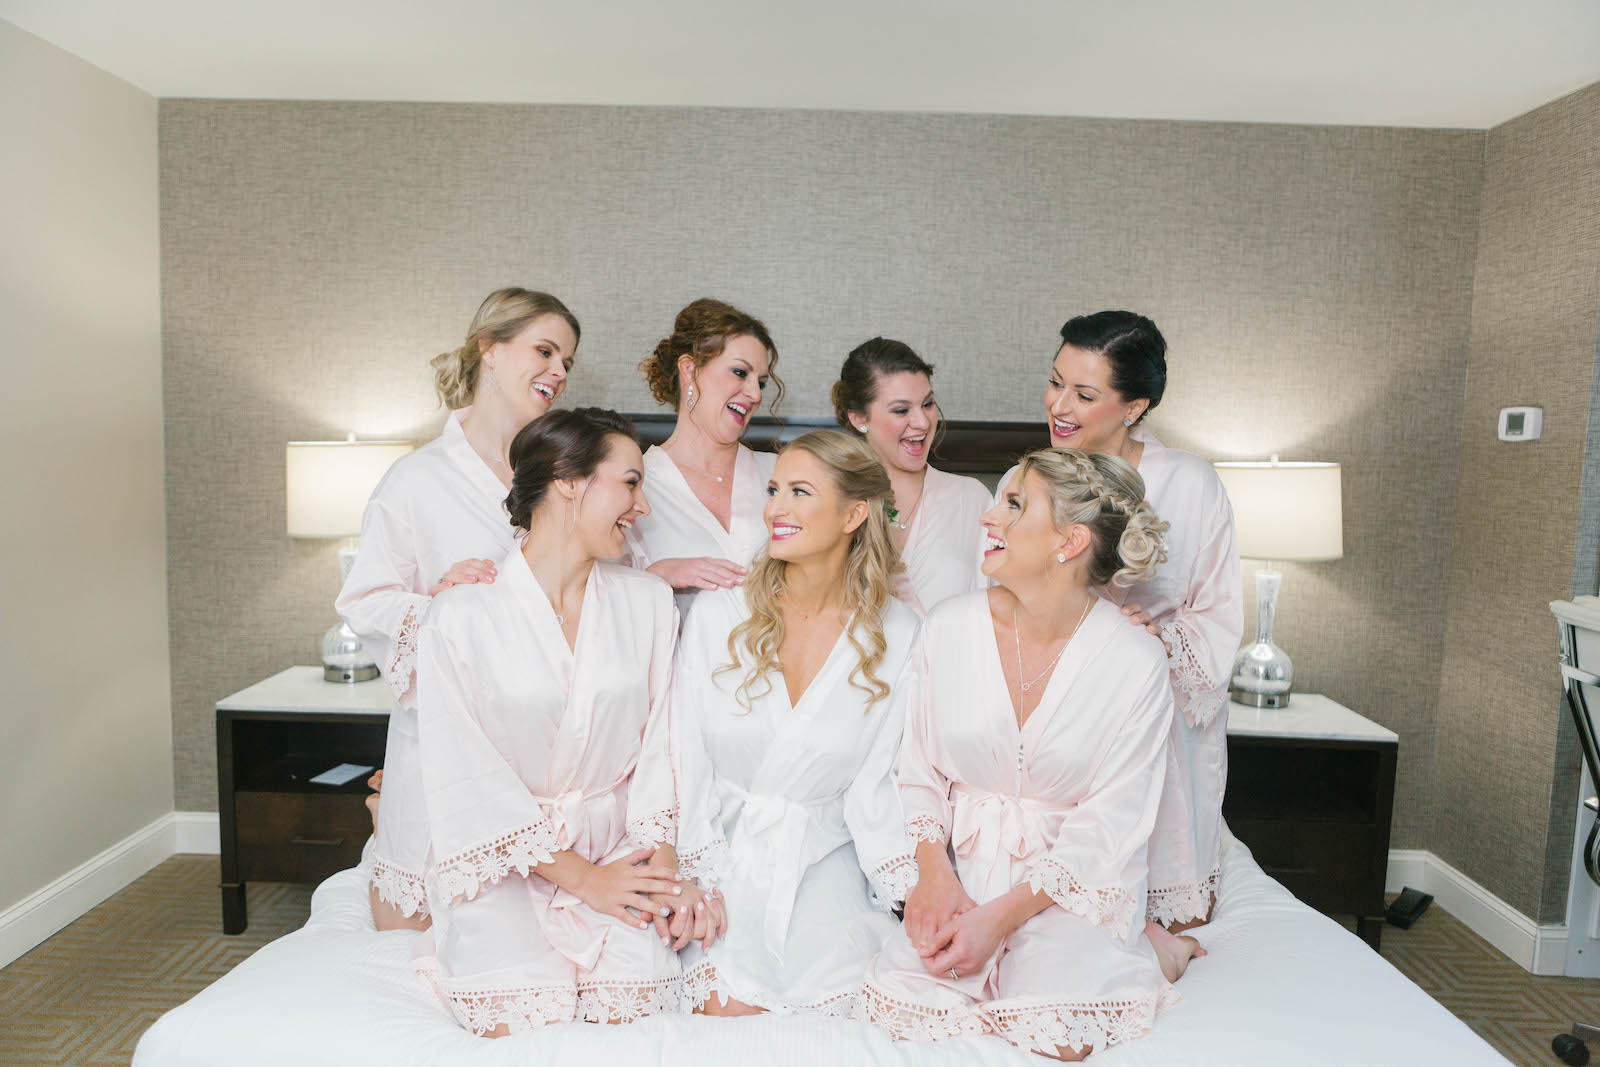 Classic Bride and Bridesmaids in Matching Blush Pink Lace Trim Robes